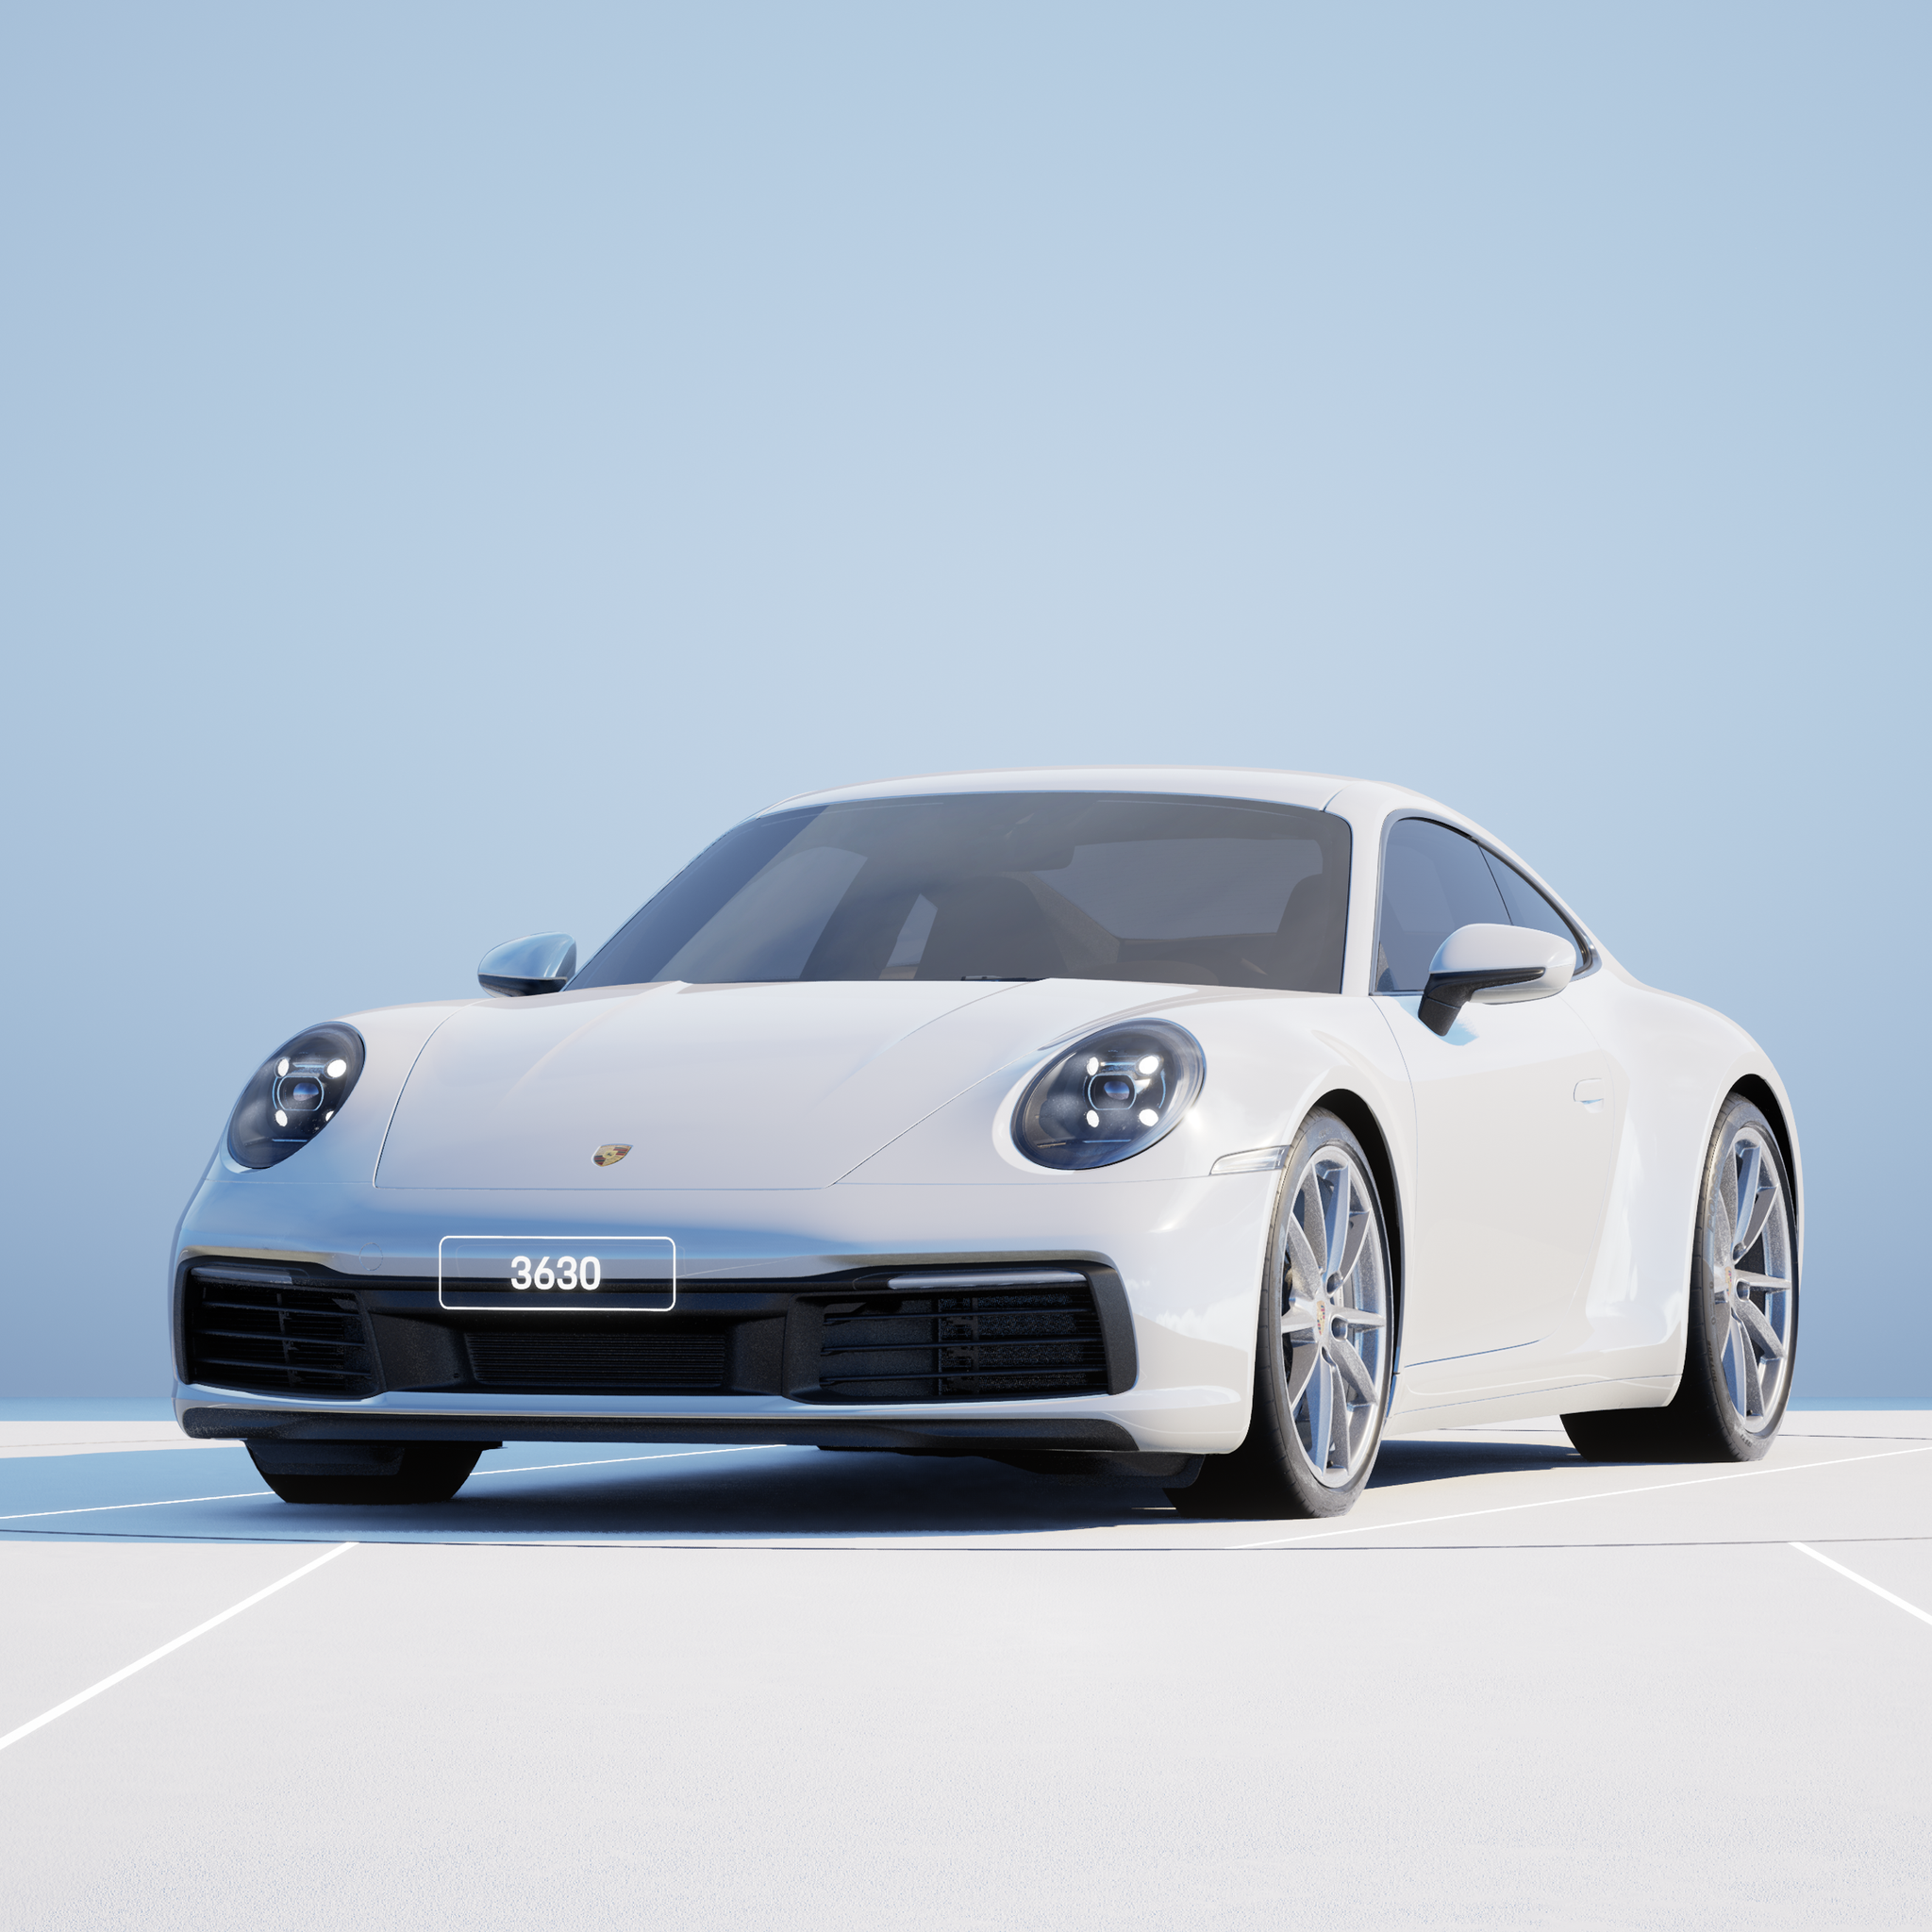 The PORSCHΞ 911 3630 image in phase